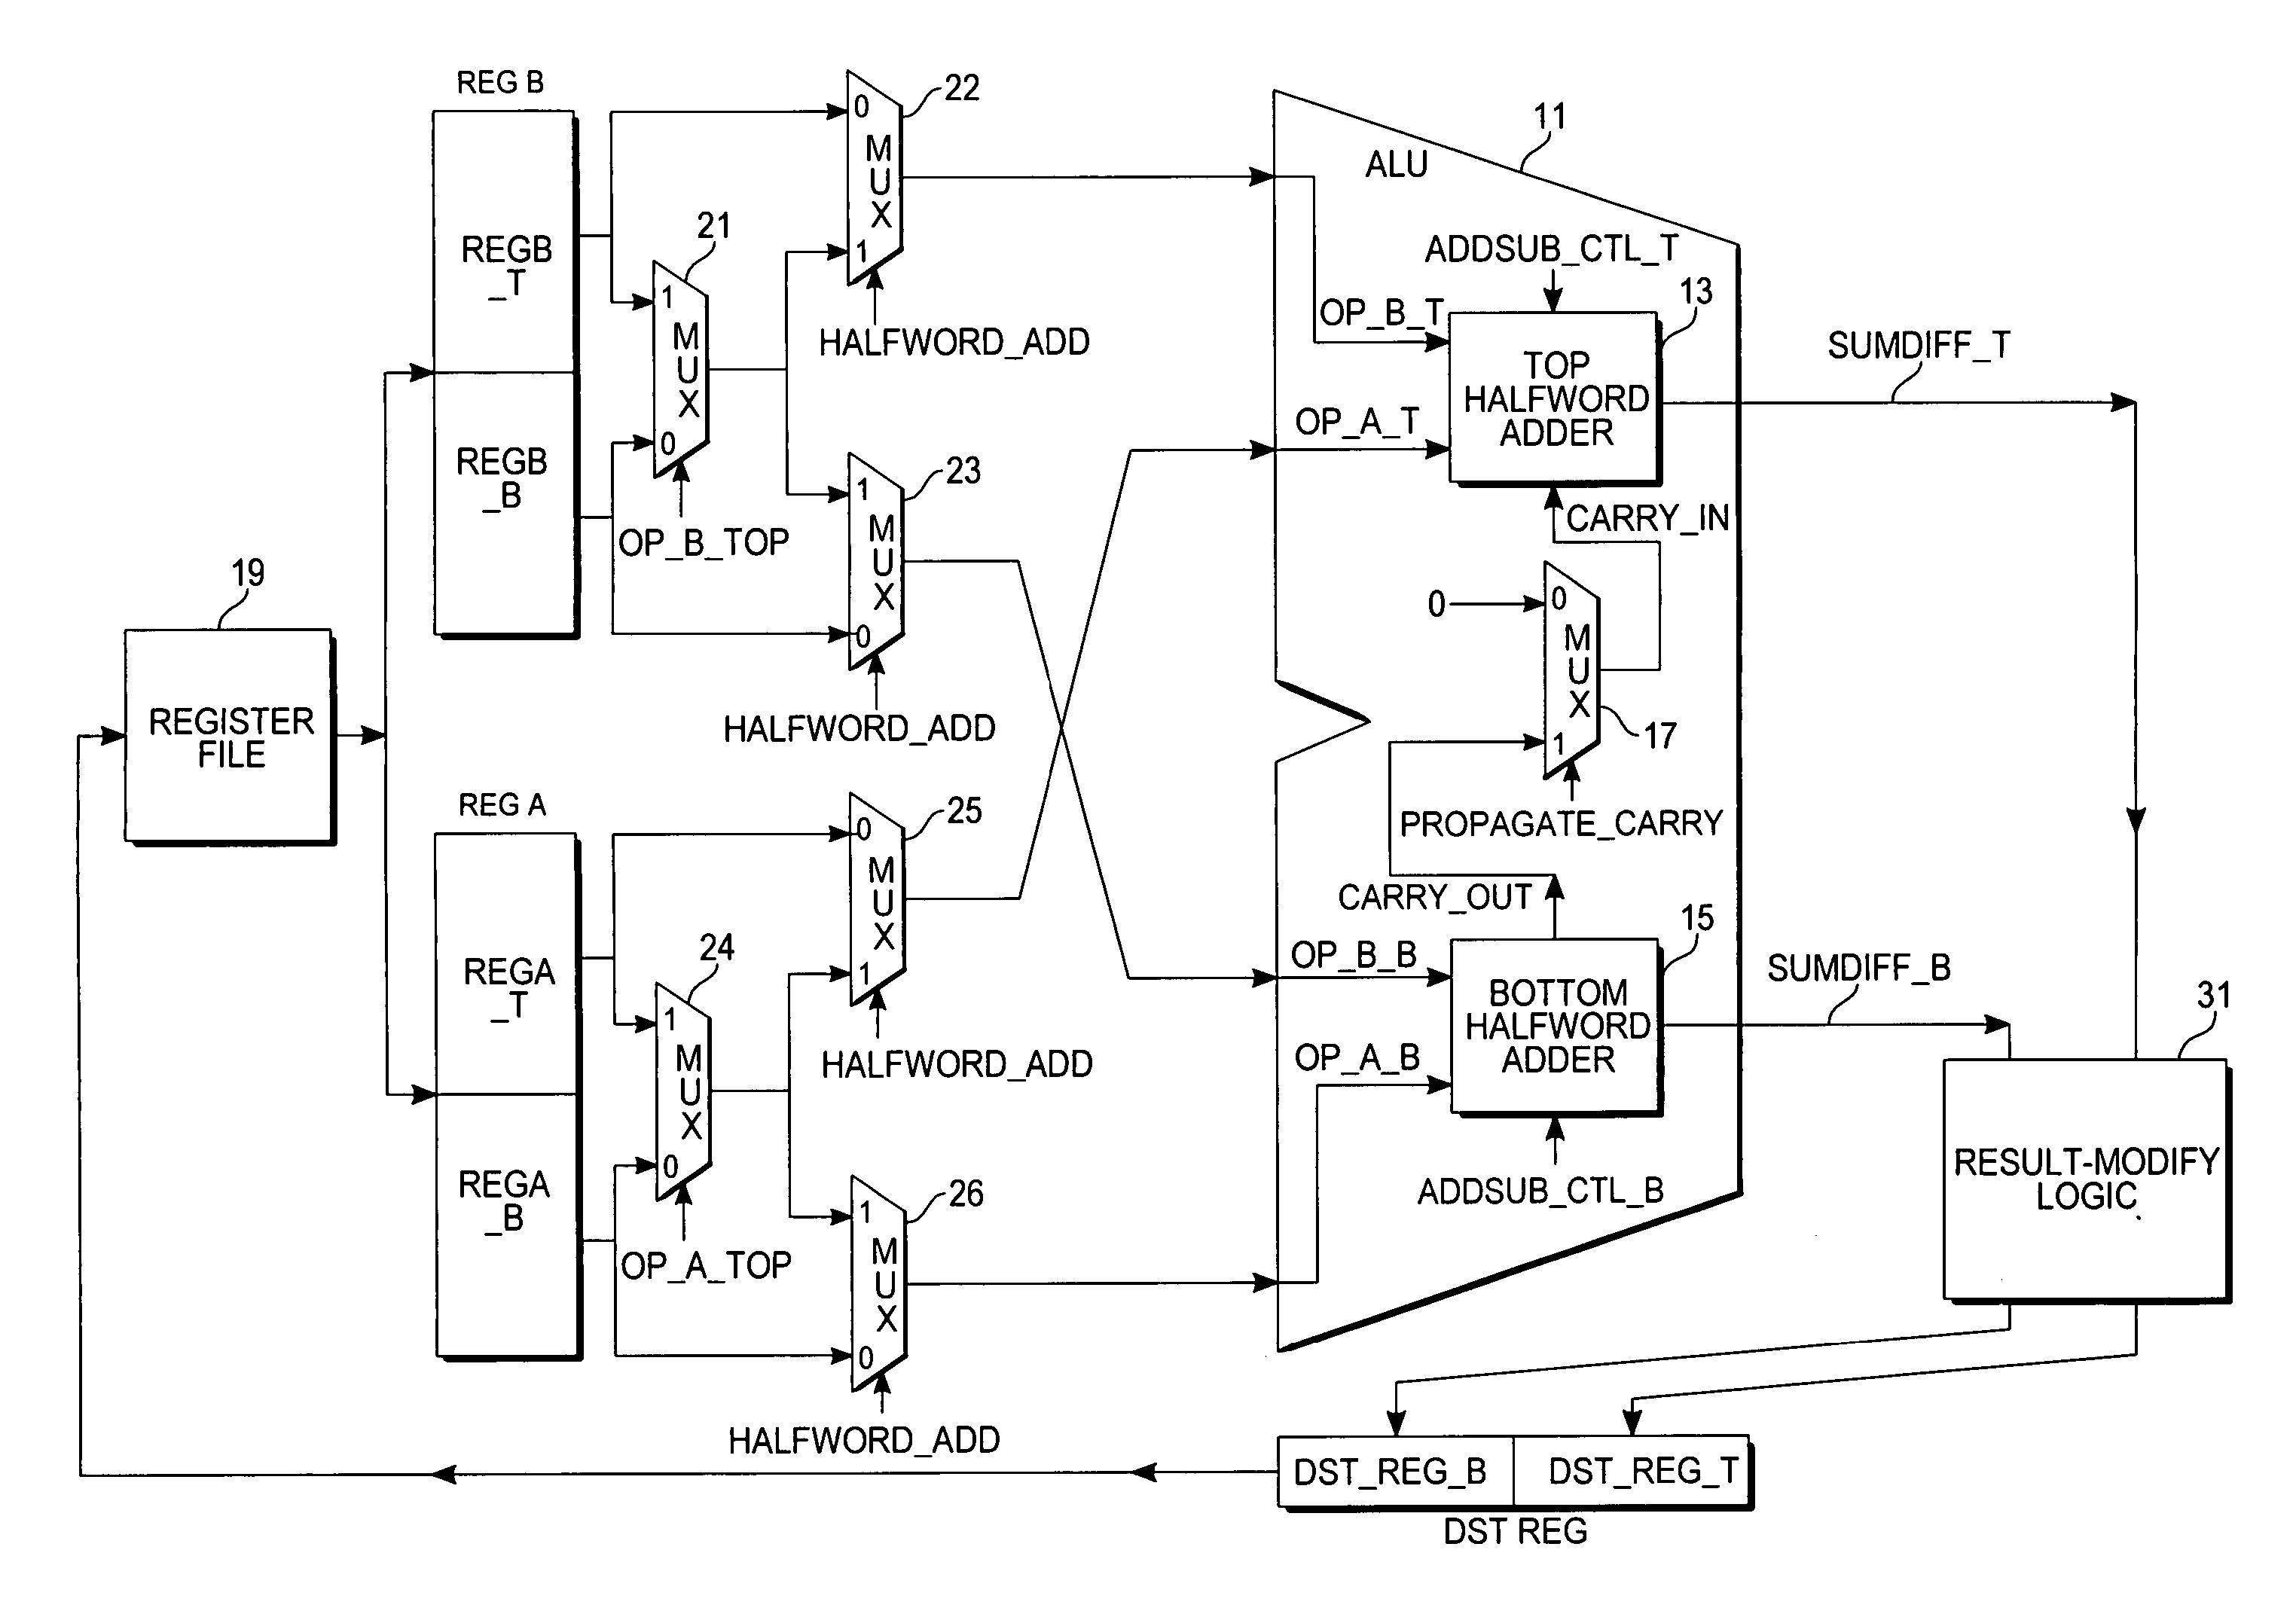 Packed add-subtract operation in a microprocessor